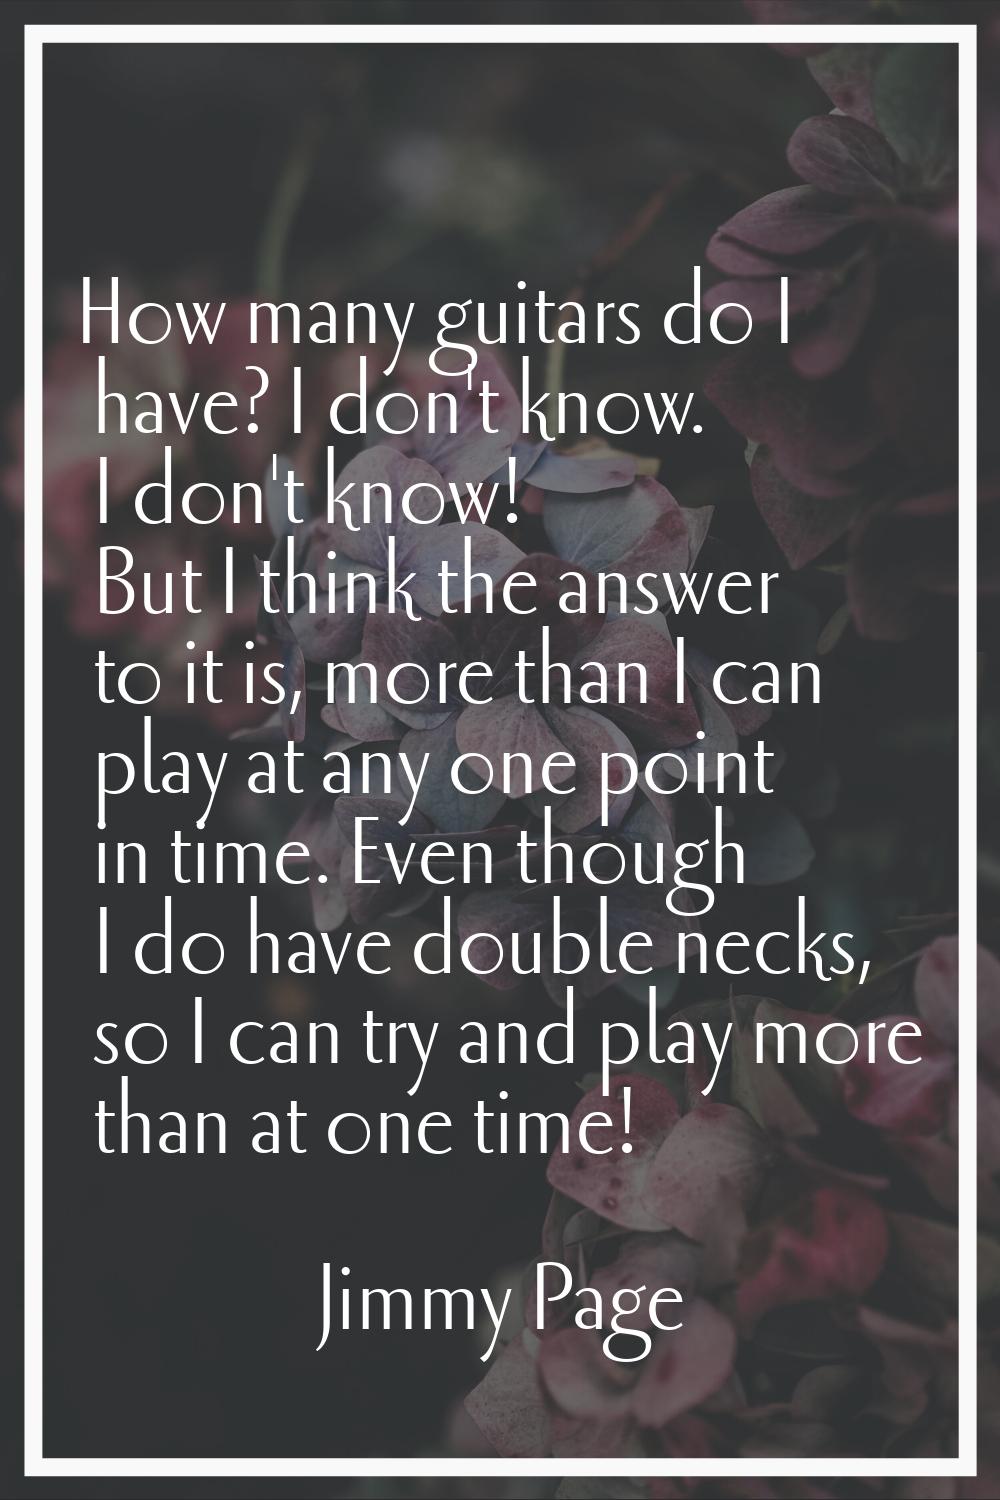 How many guitars do I have? I don't know. I don't know! But I think the answer to it is, more than 